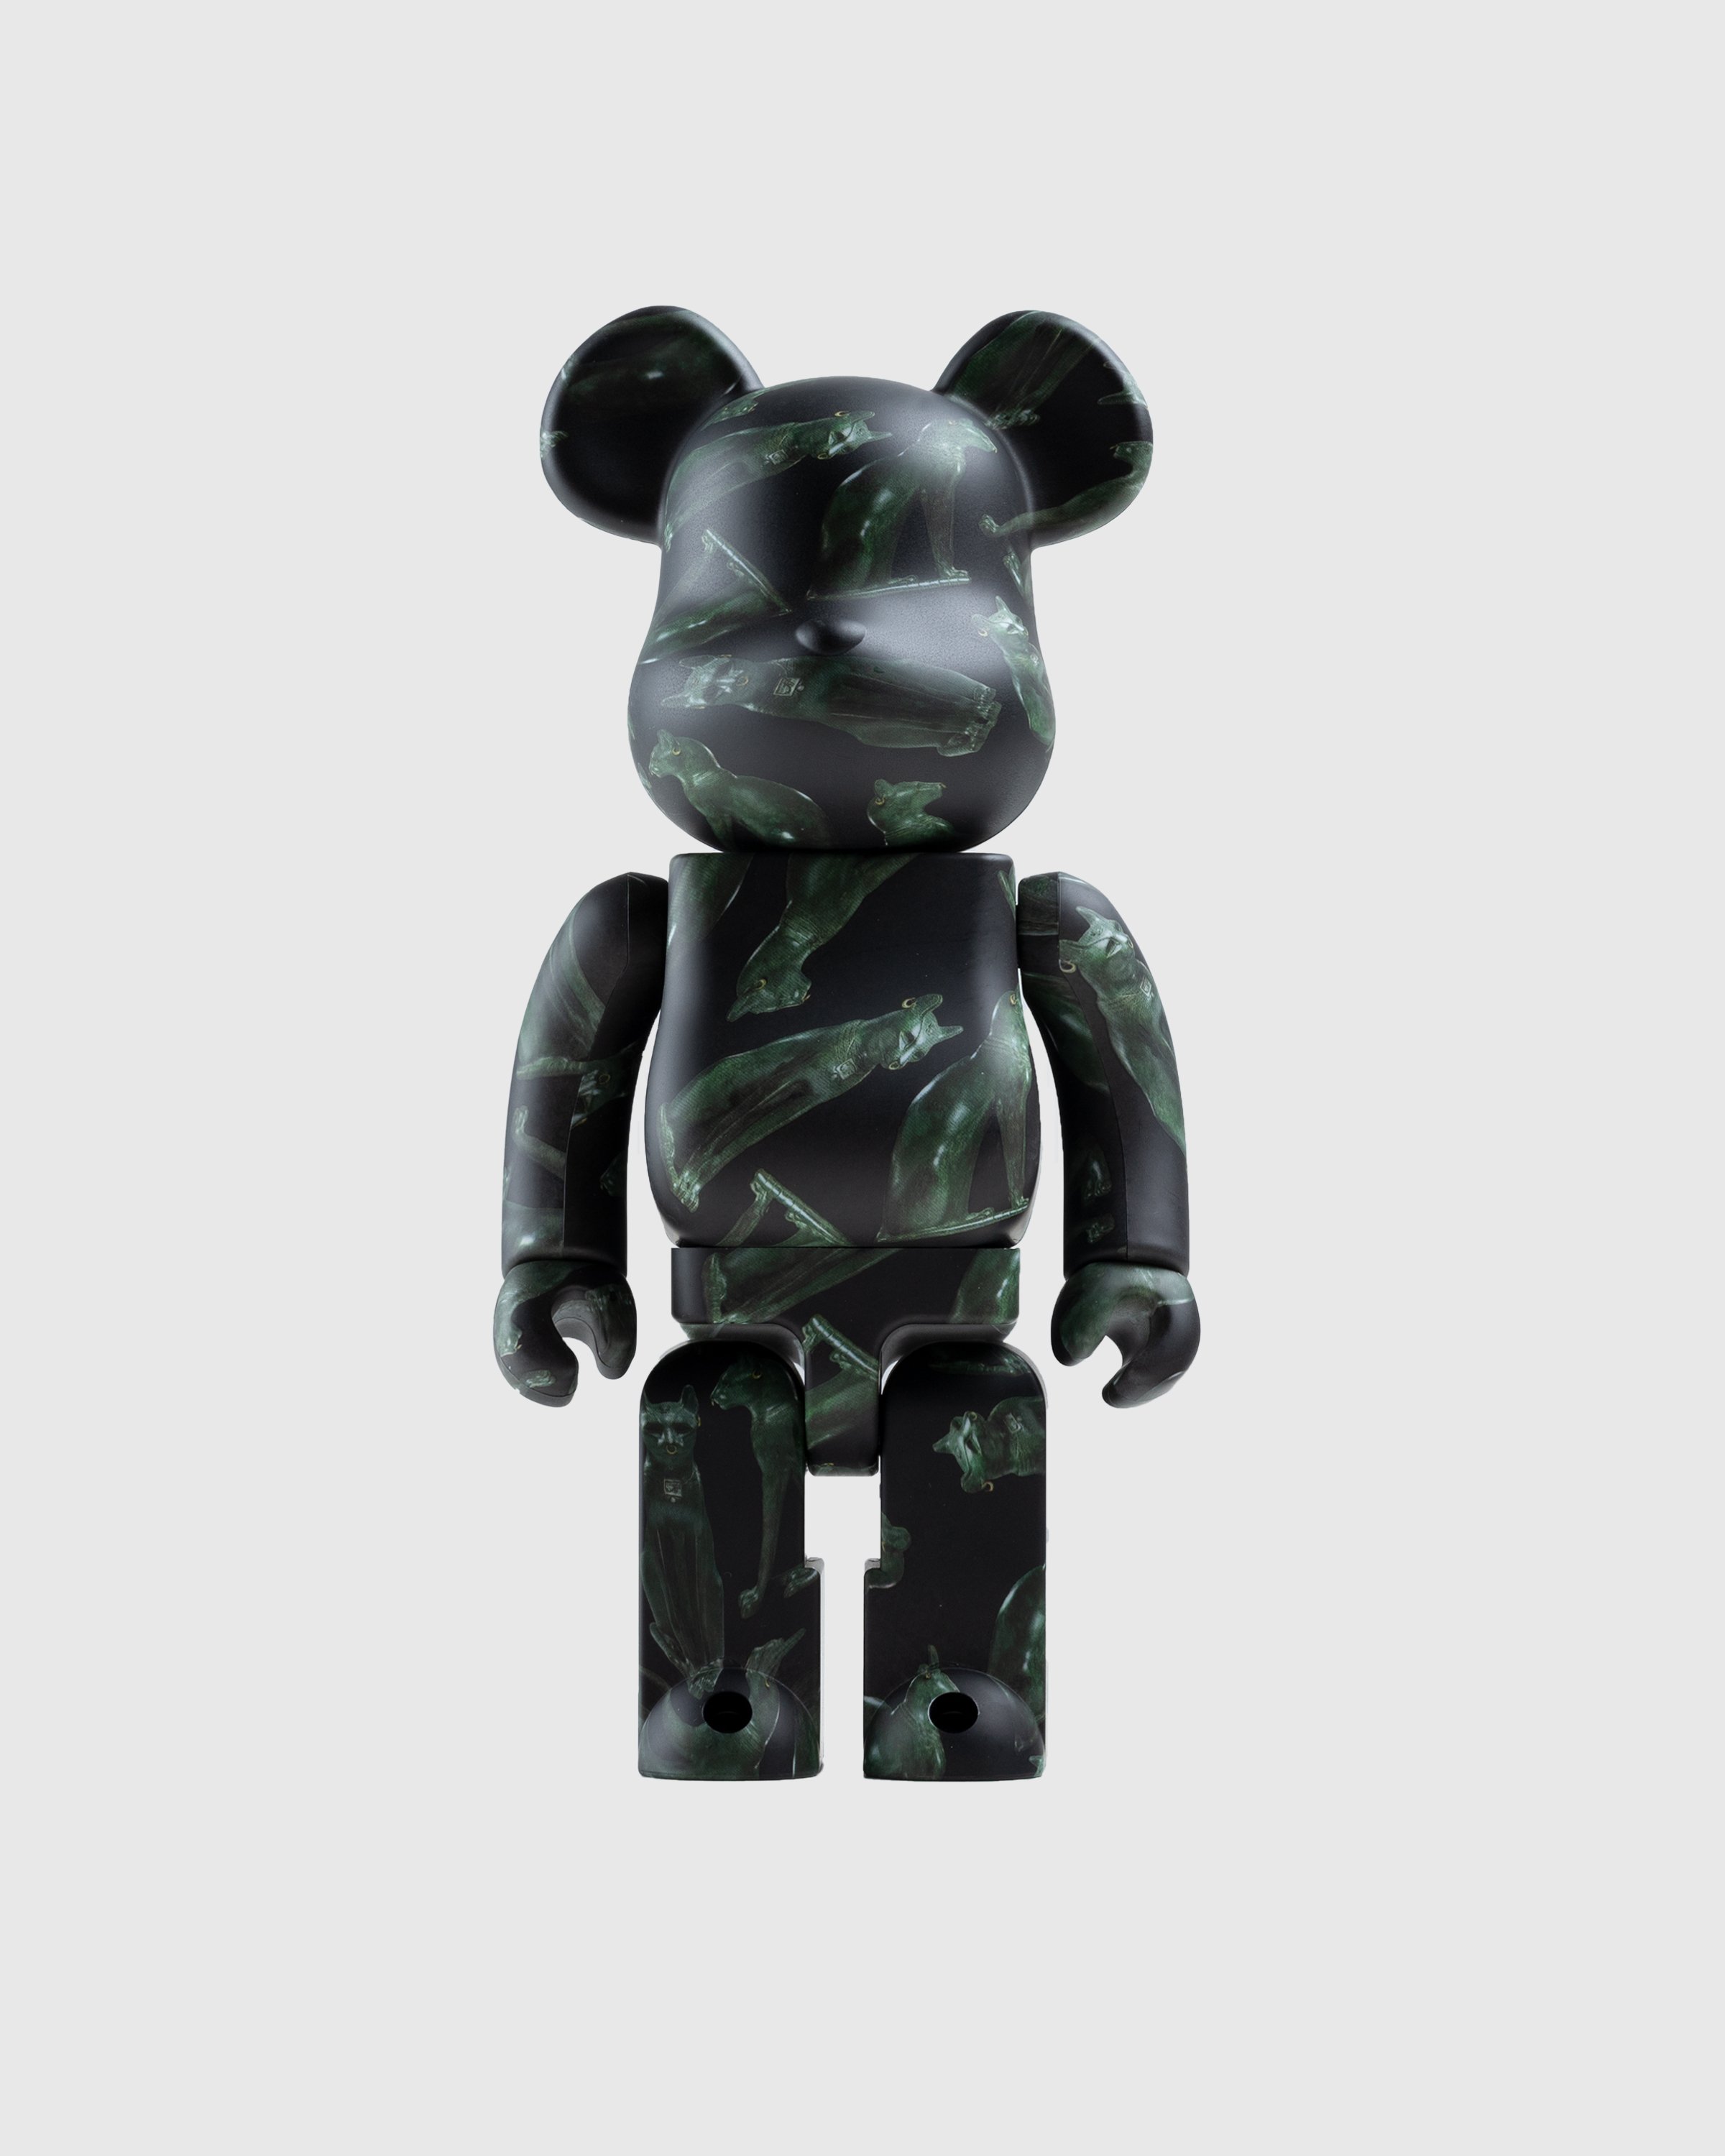 Medicom - Be@rbrick The British Museum The Gayer-Anderson Cat 1000% Grey - Lifestyle - Grey - Image 1